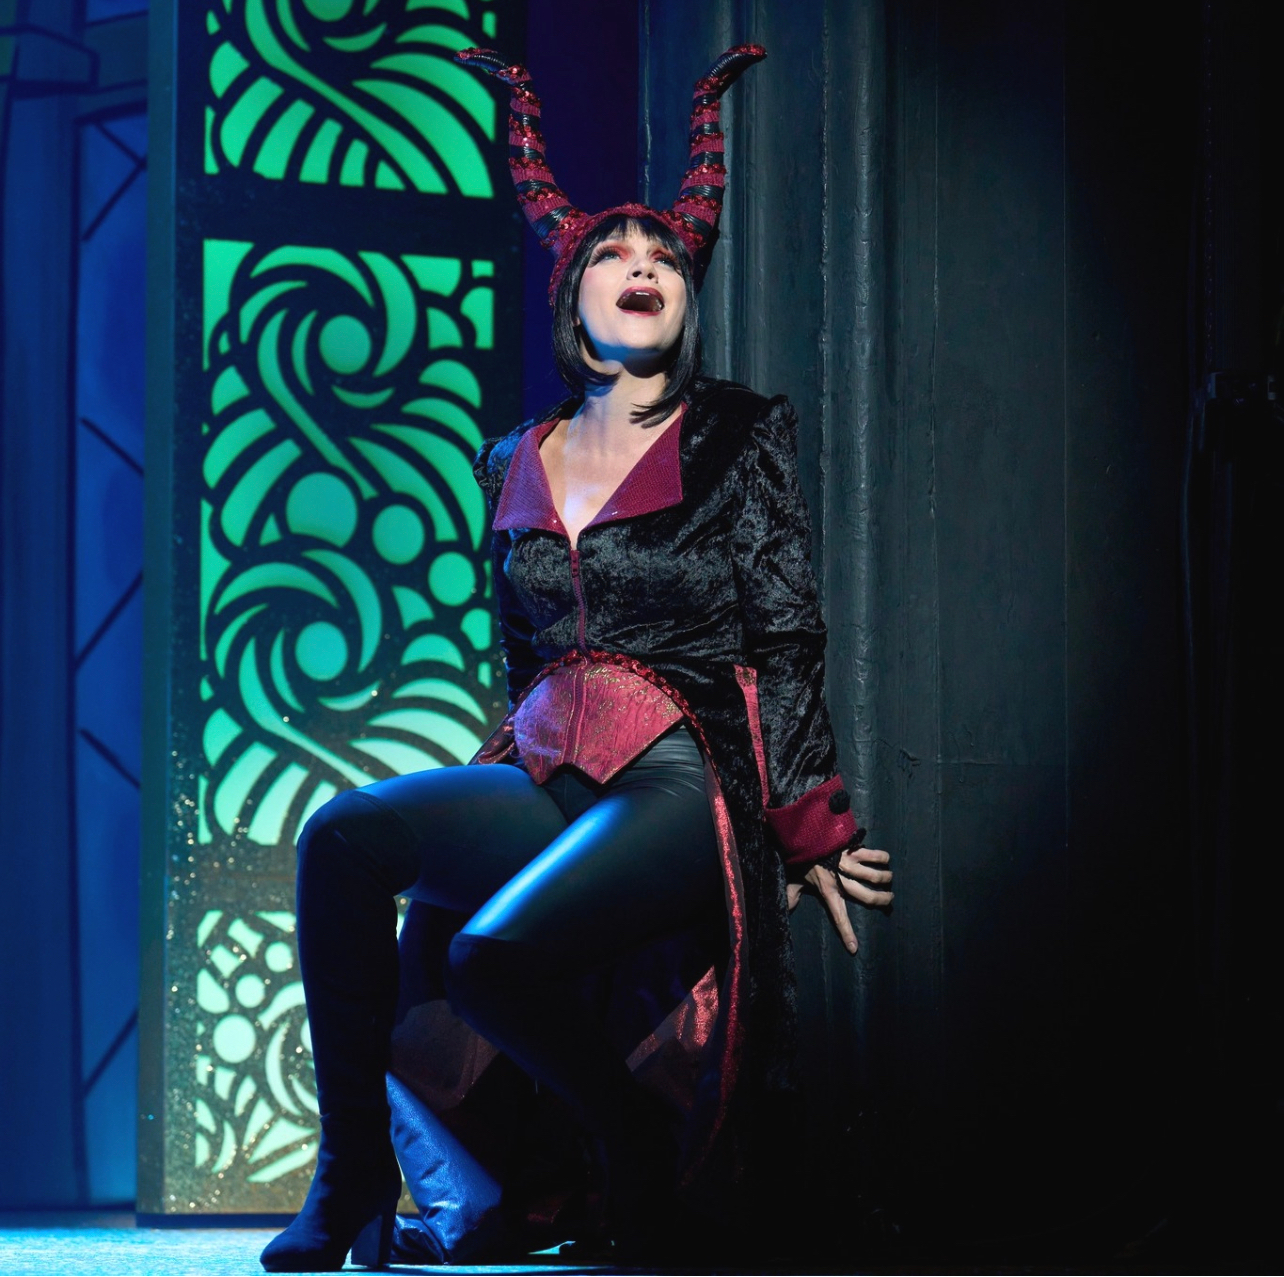 Pippa onstage as Maleficent